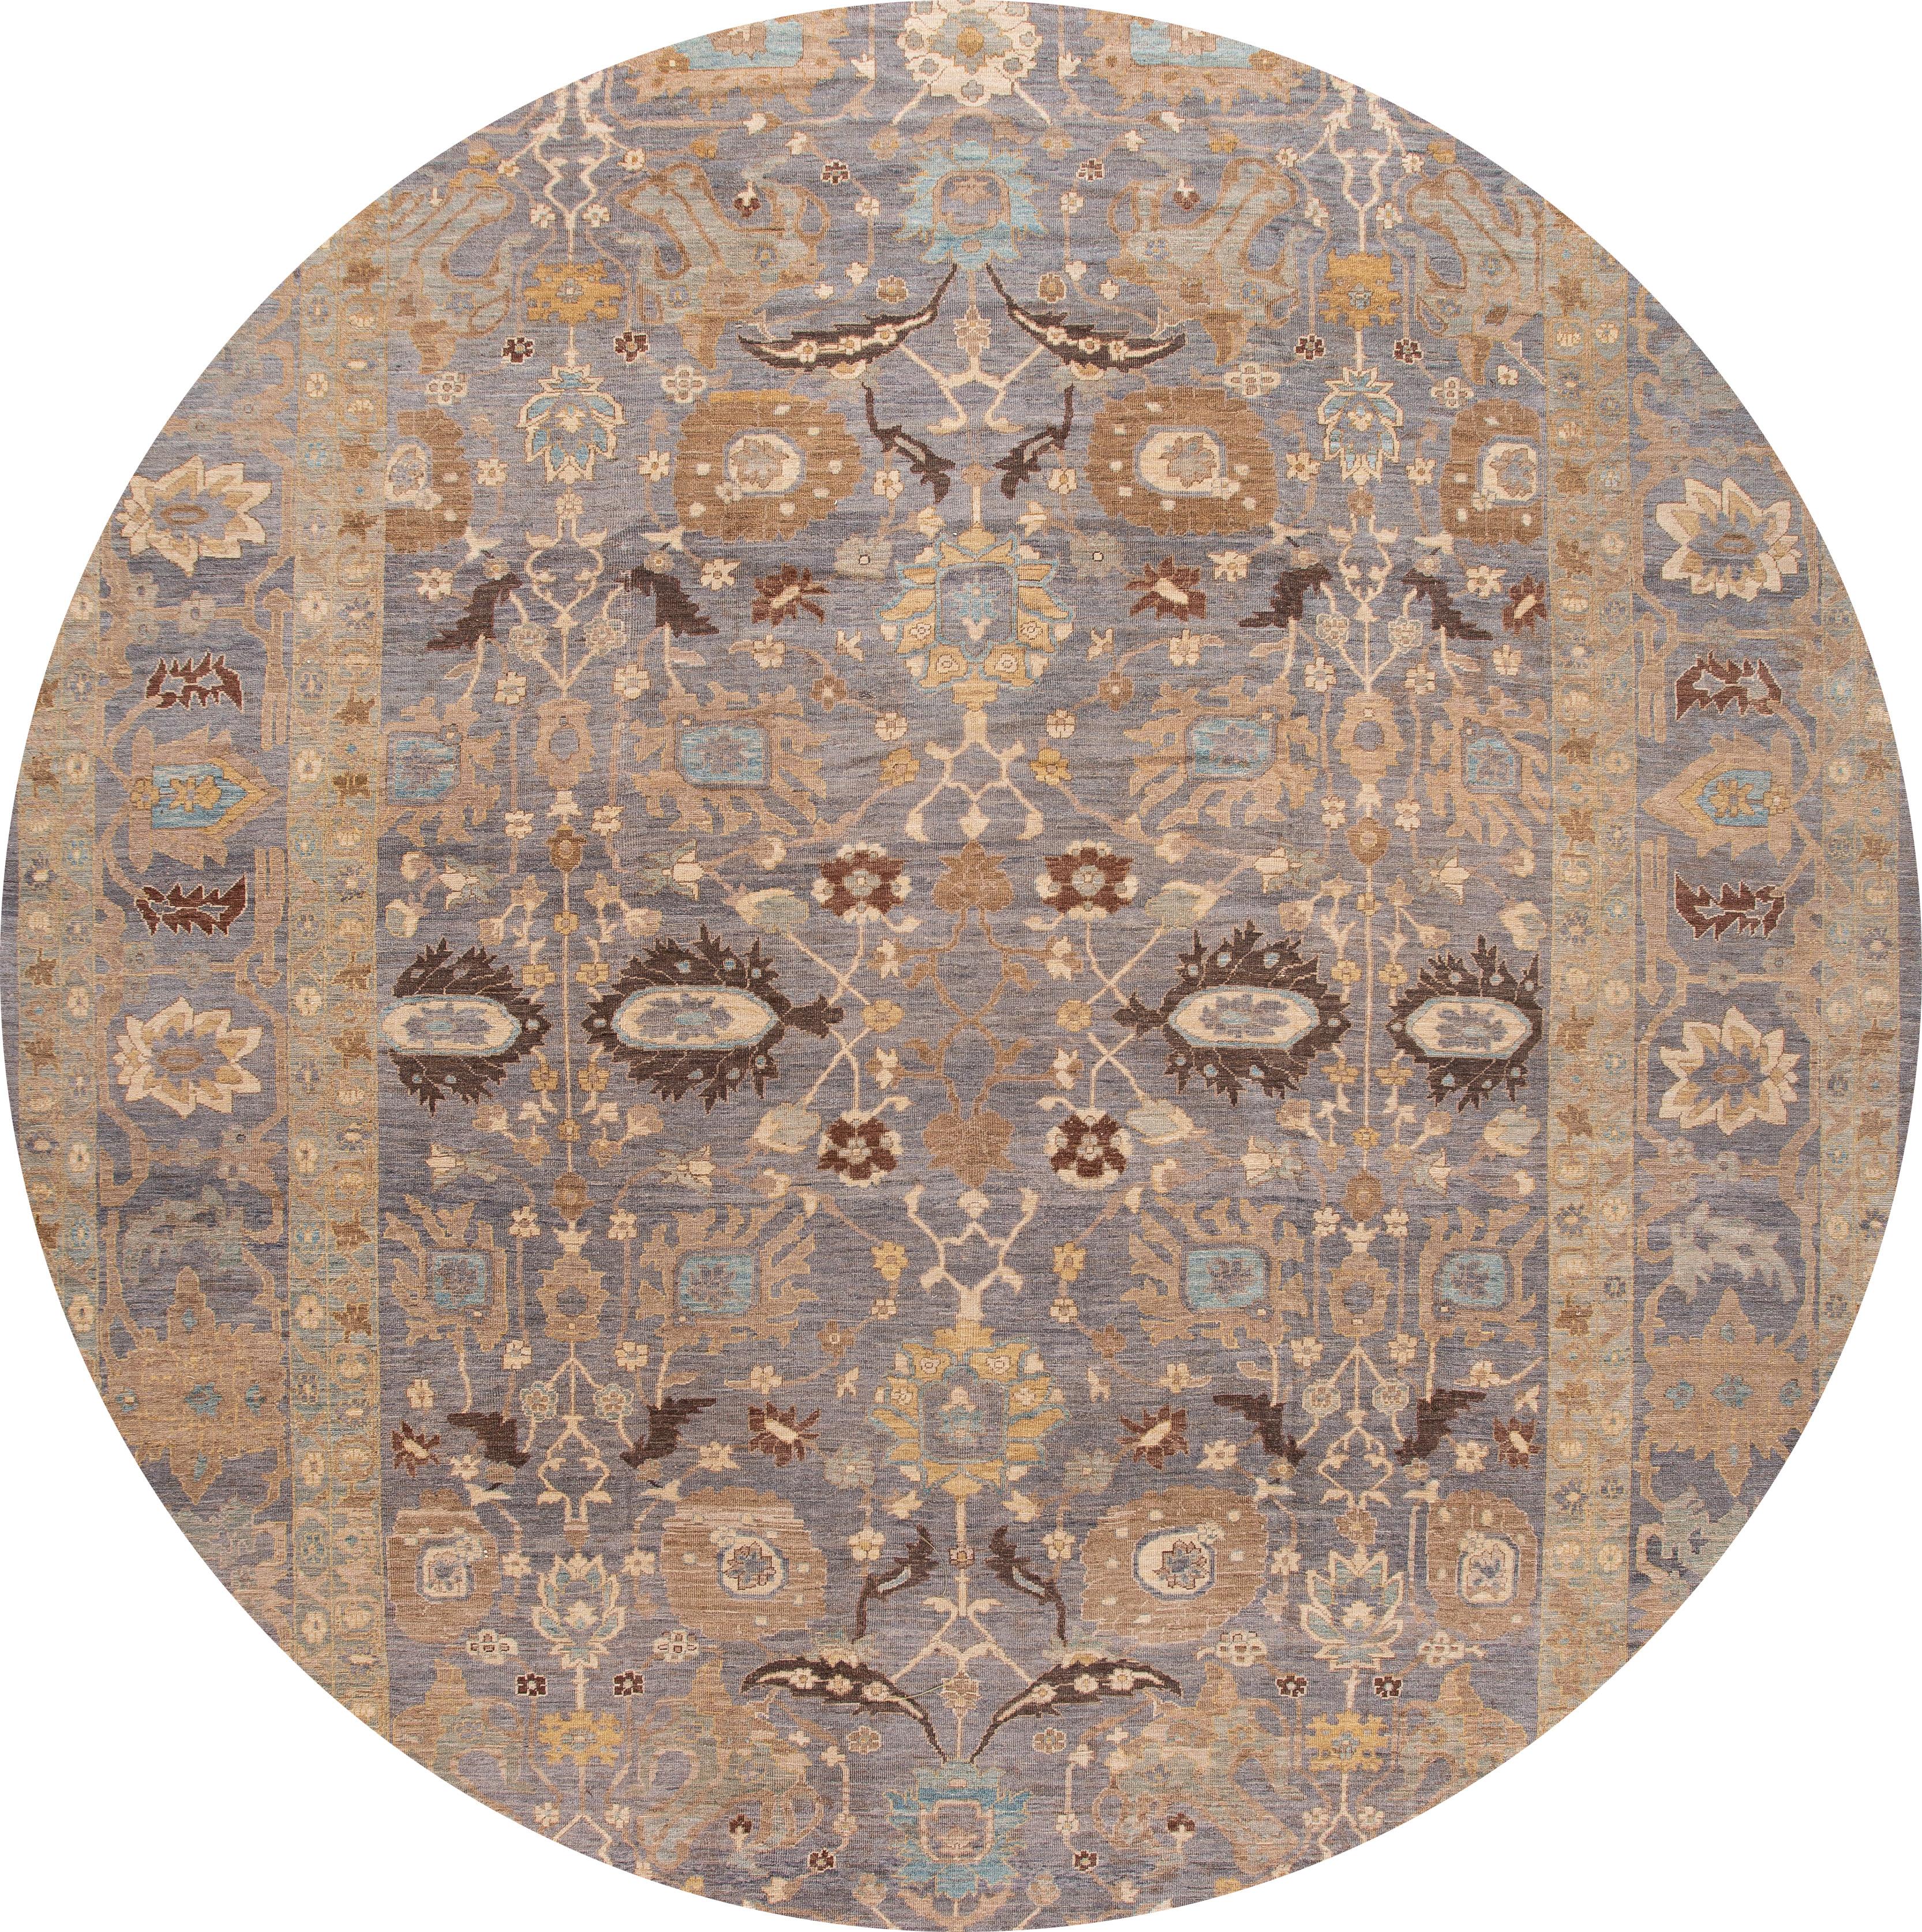 Beautiful Sultanabad rug with a gray field and beige accents with an all-over floral design. 

This rug measures 14' 8